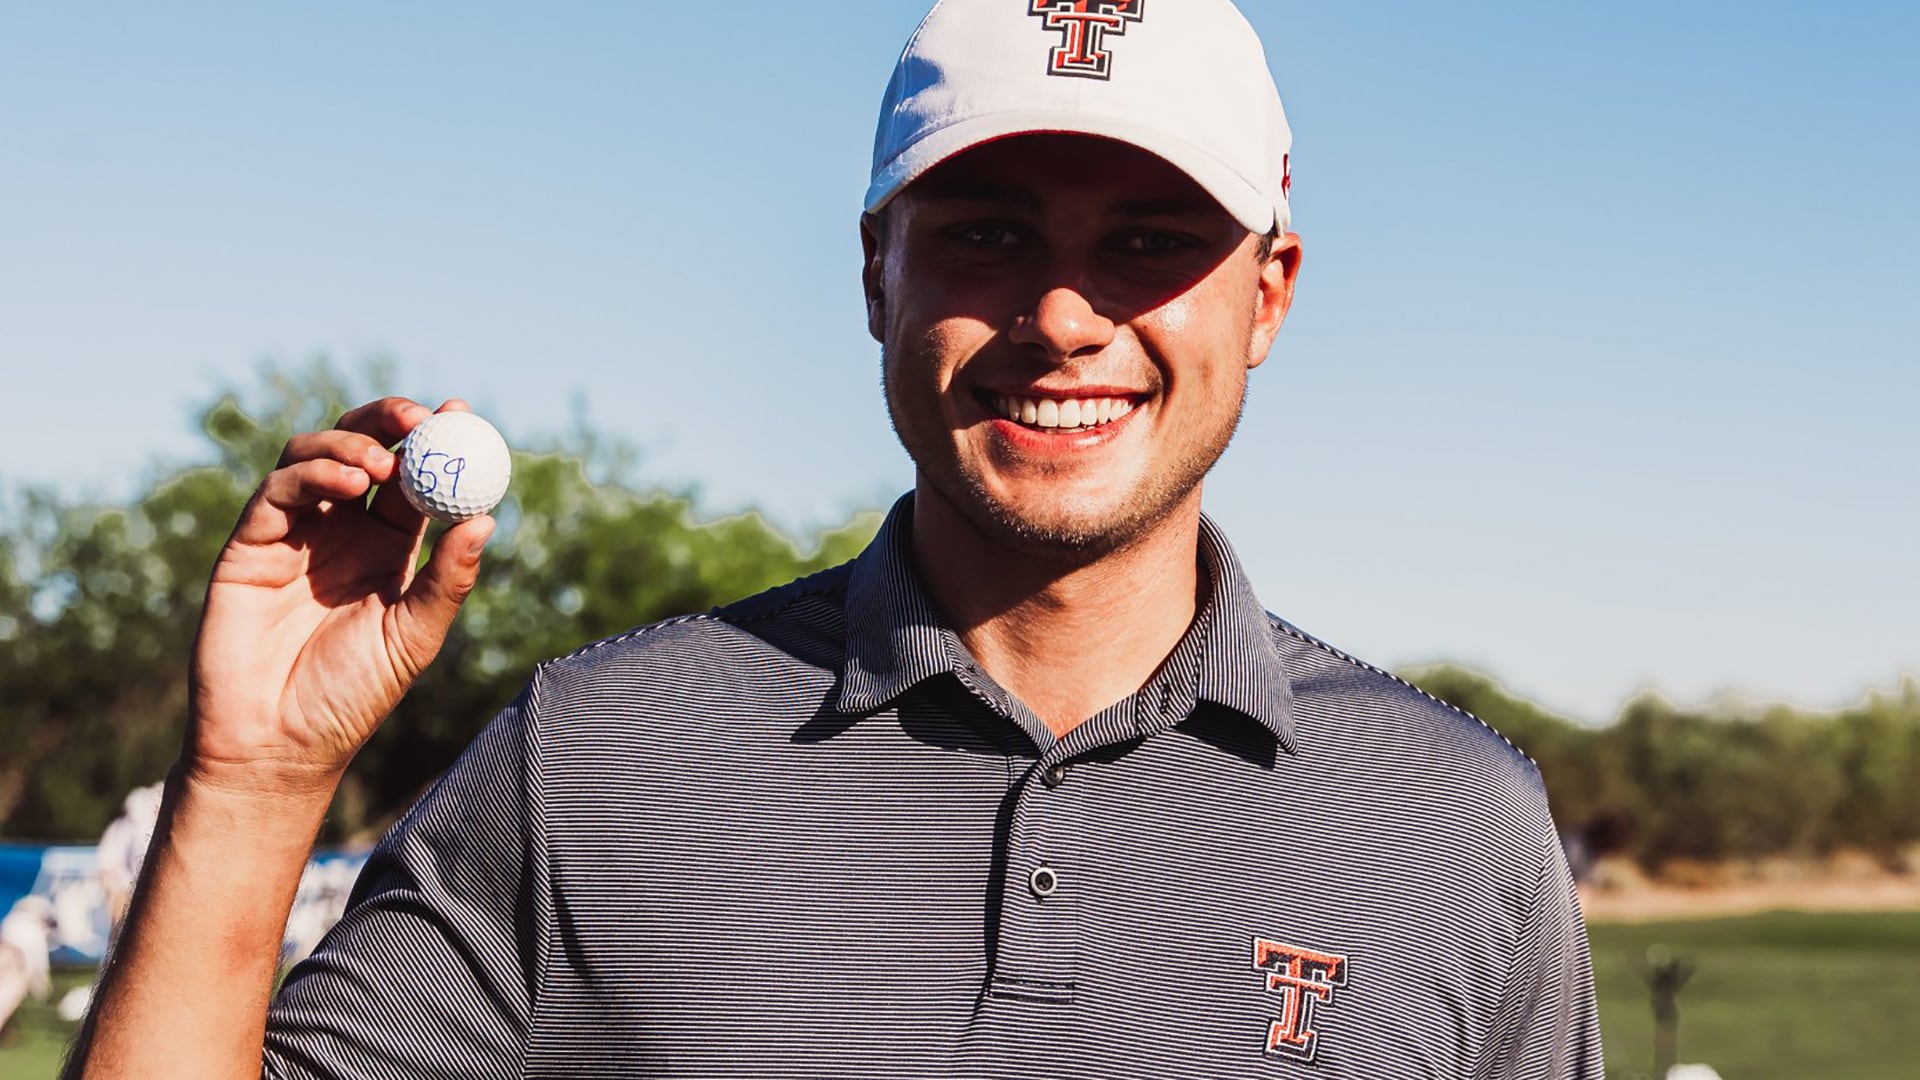 Two days before NCAAs, Texas Tech’s Ludvig Aberg fires 59